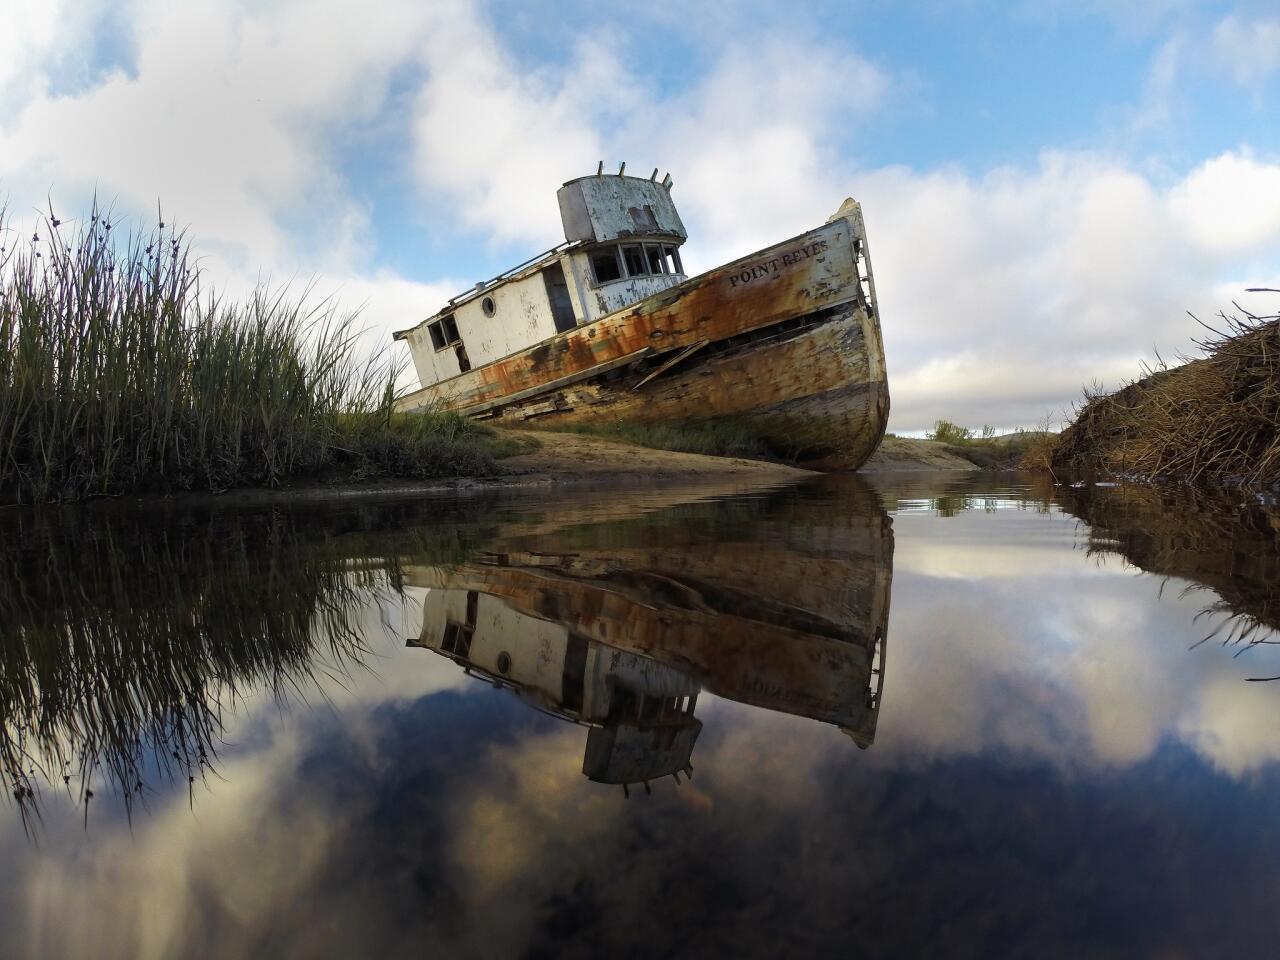 A marooned fishing boat is reflected in low tide pools along Tomales Bay at Point Reyes National Seashore.